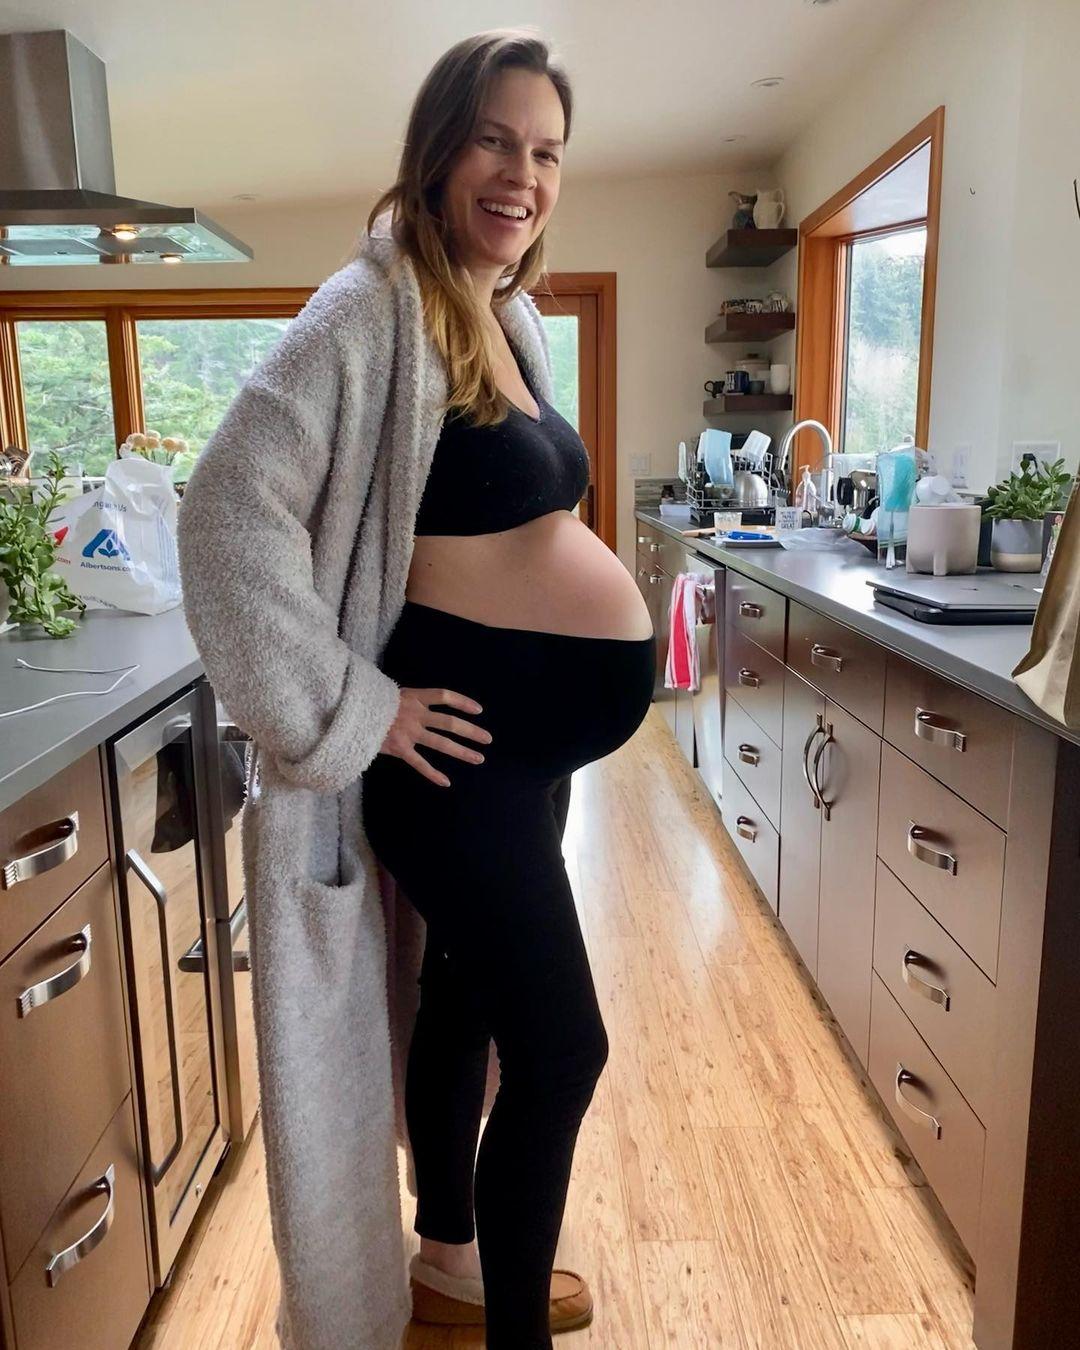 Hilary Swank Teases Due Date With Huge Baby Bump On Display